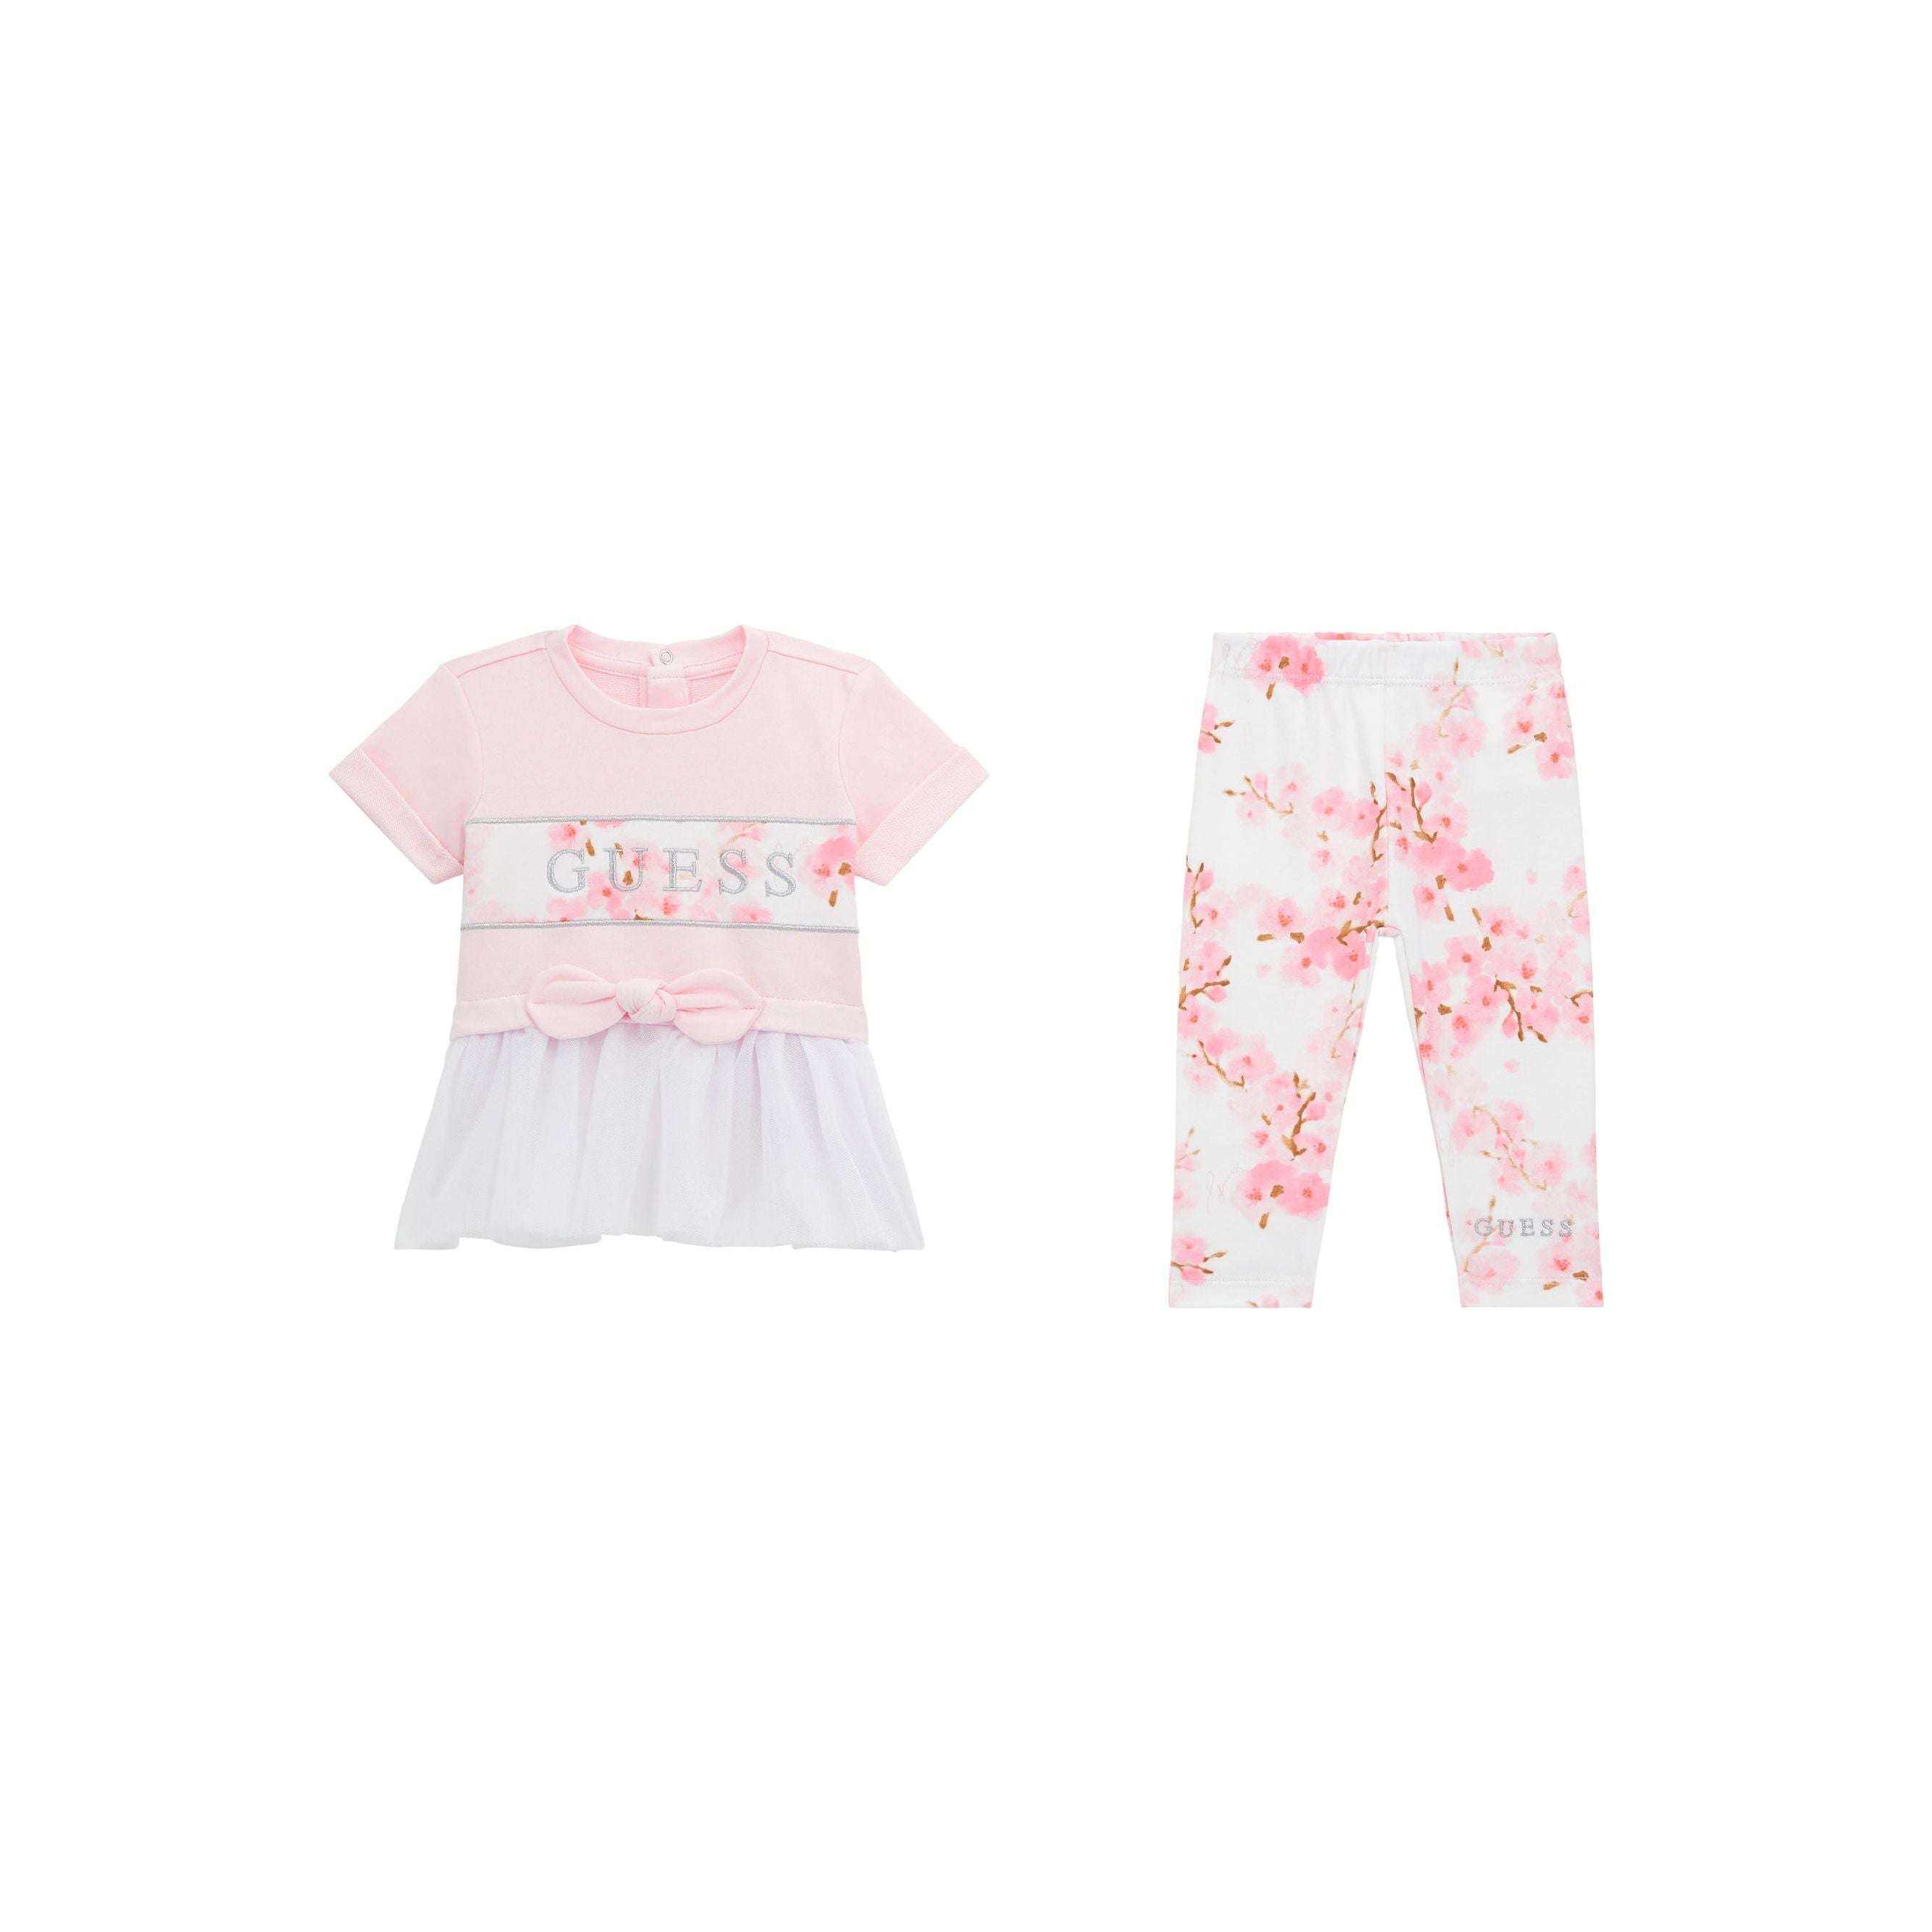 Guess - Infant Girls 2-Piece Set in Ballet Pink